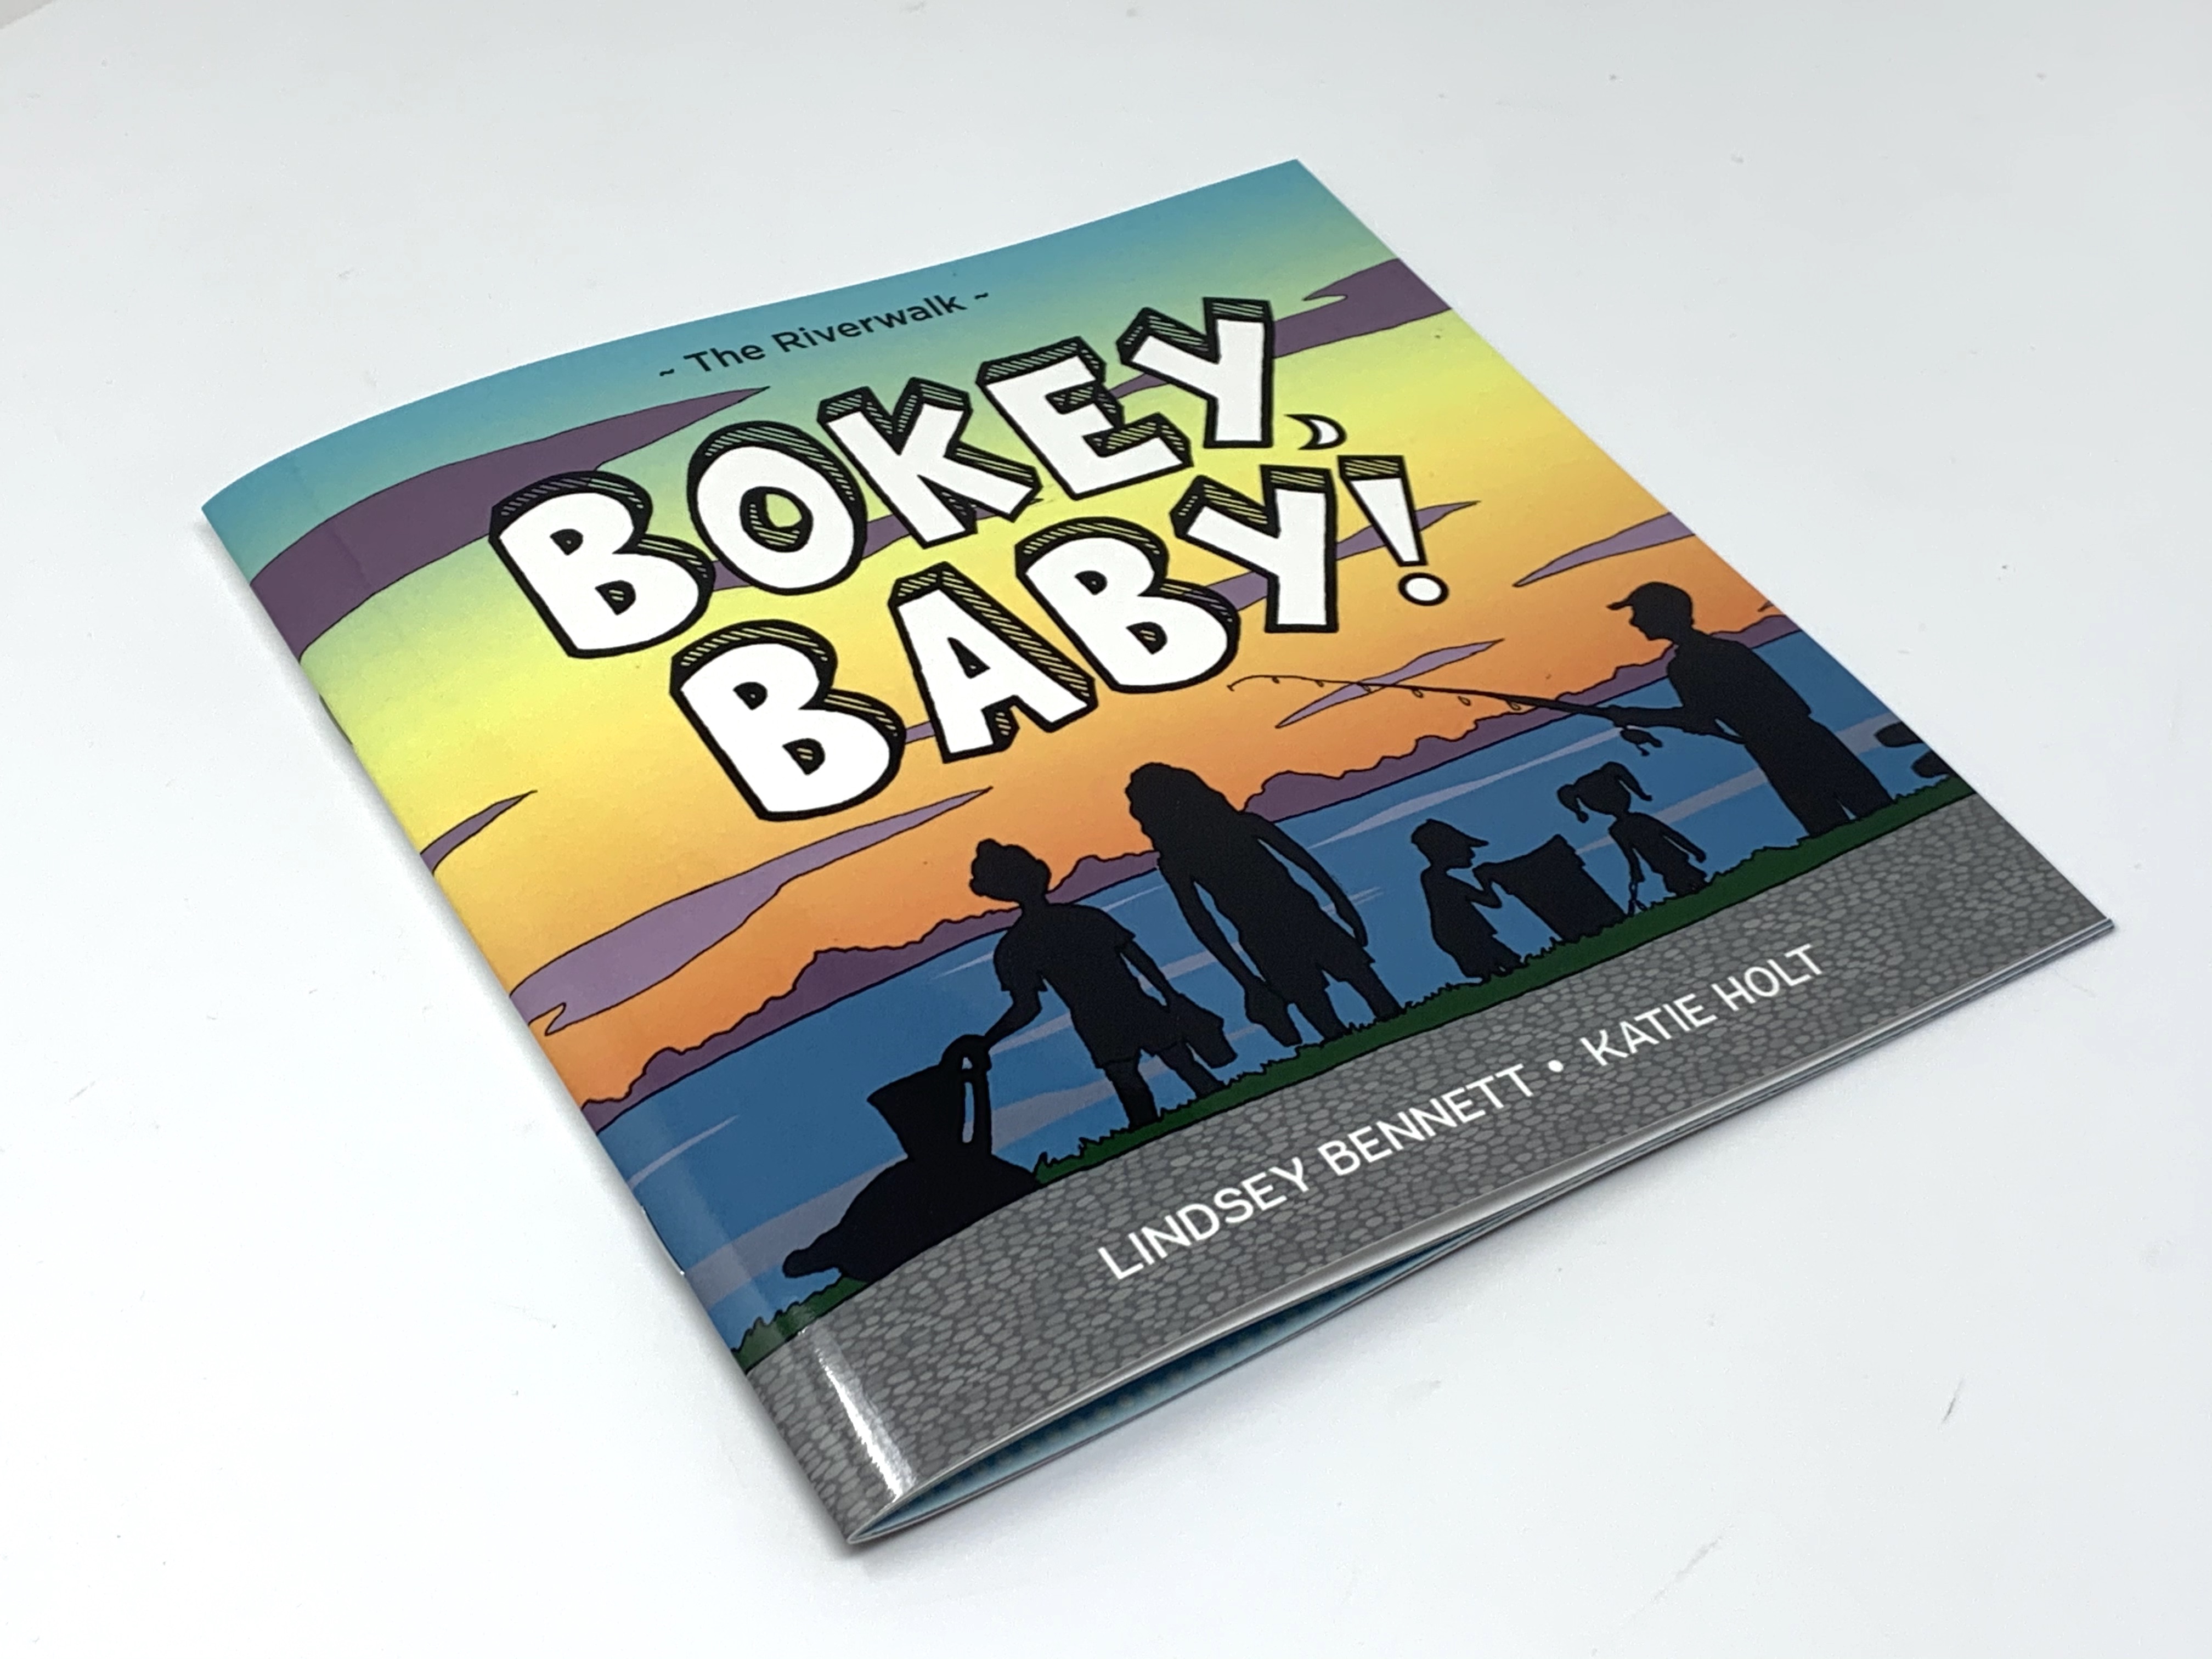 "Bokey Baby" book cover